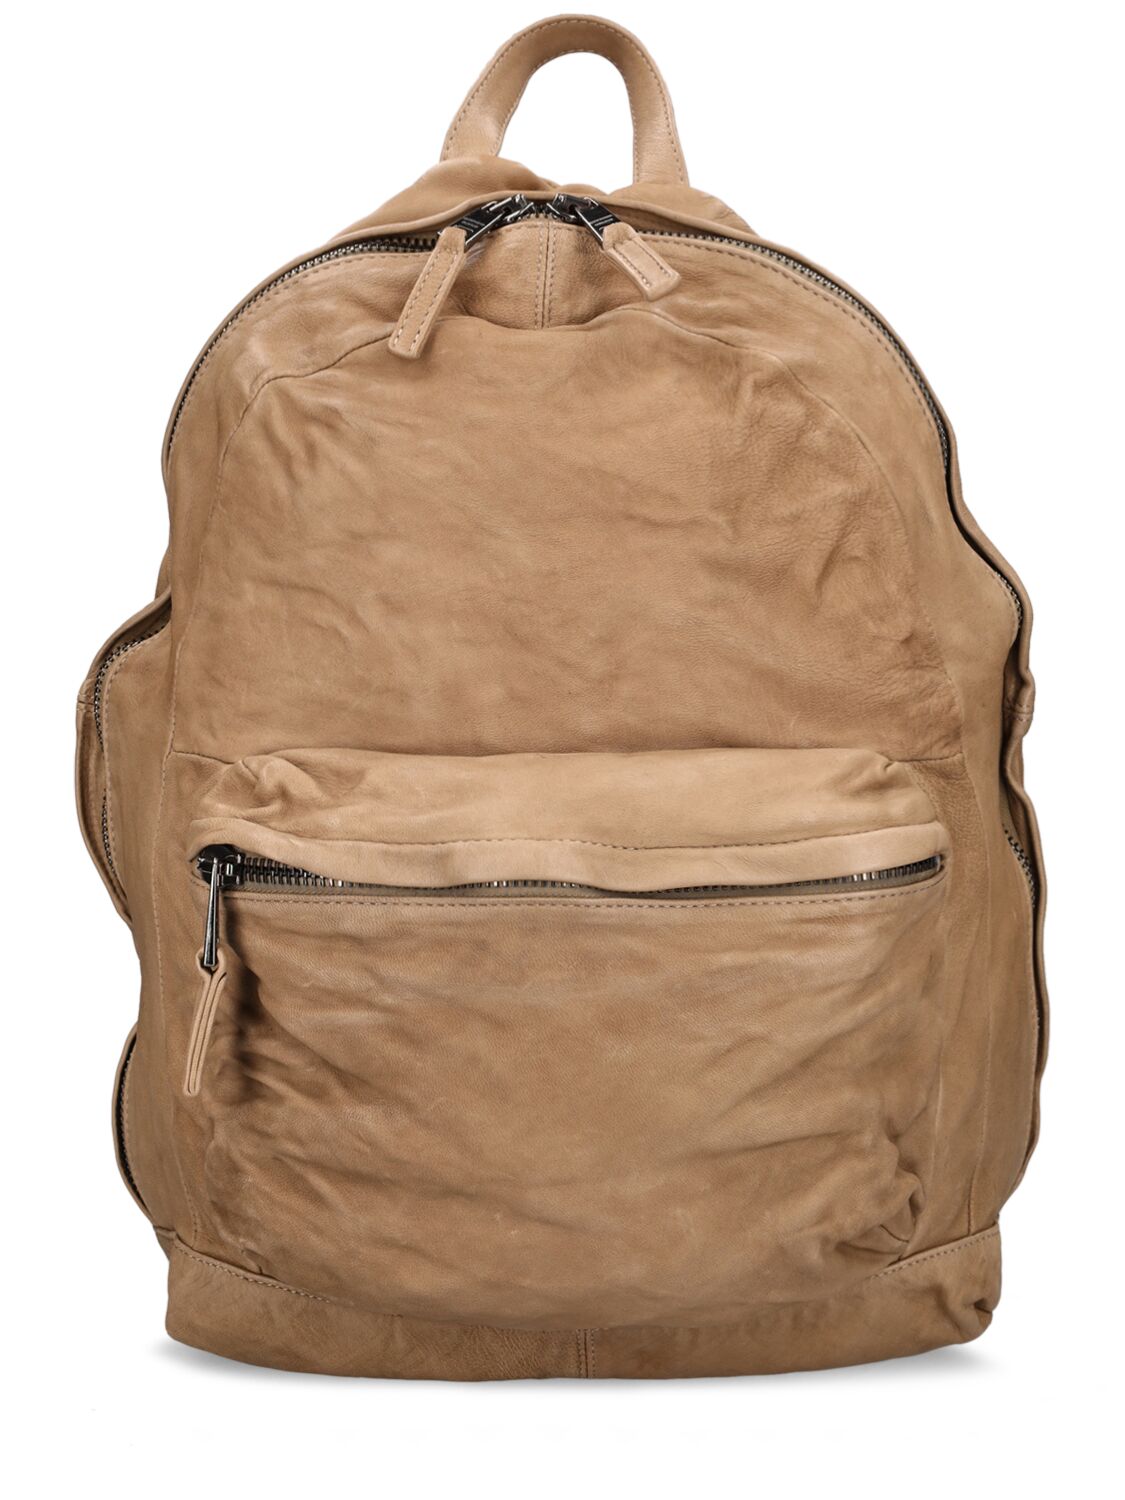 Image of Leather Backpack